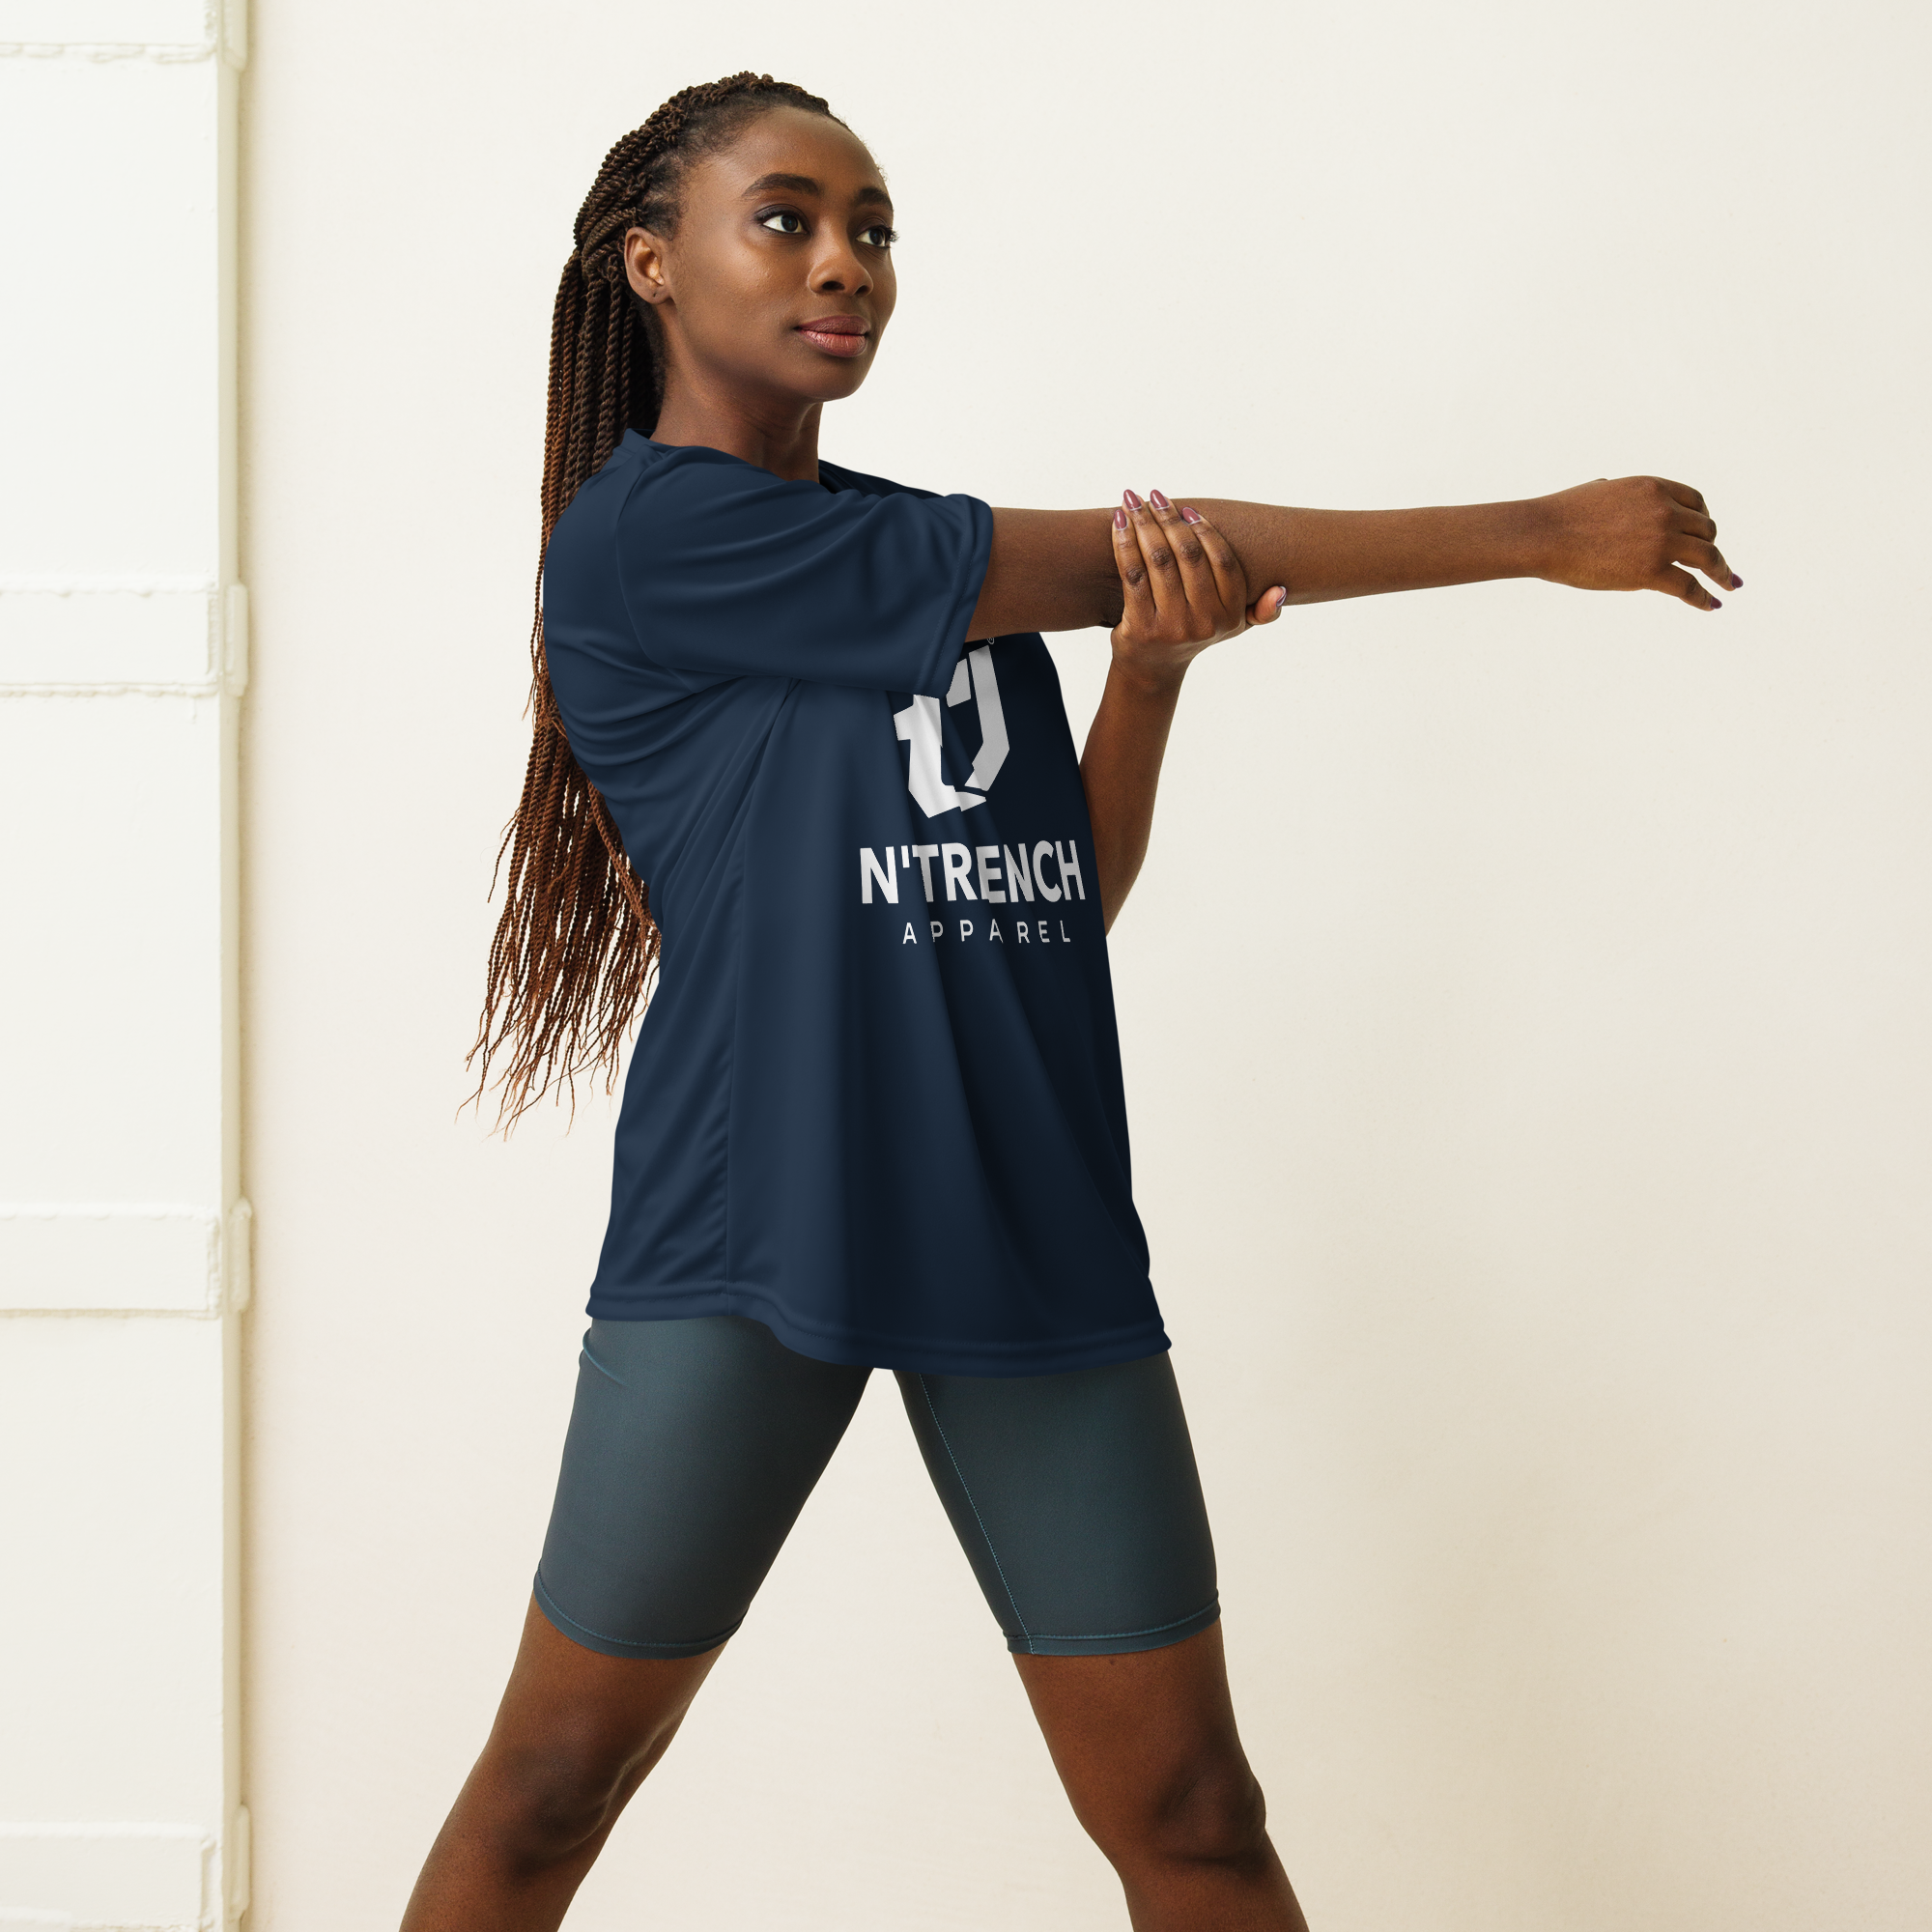 N'Trench Apparel White Lettering unisex performance crew neck t-shirt 2